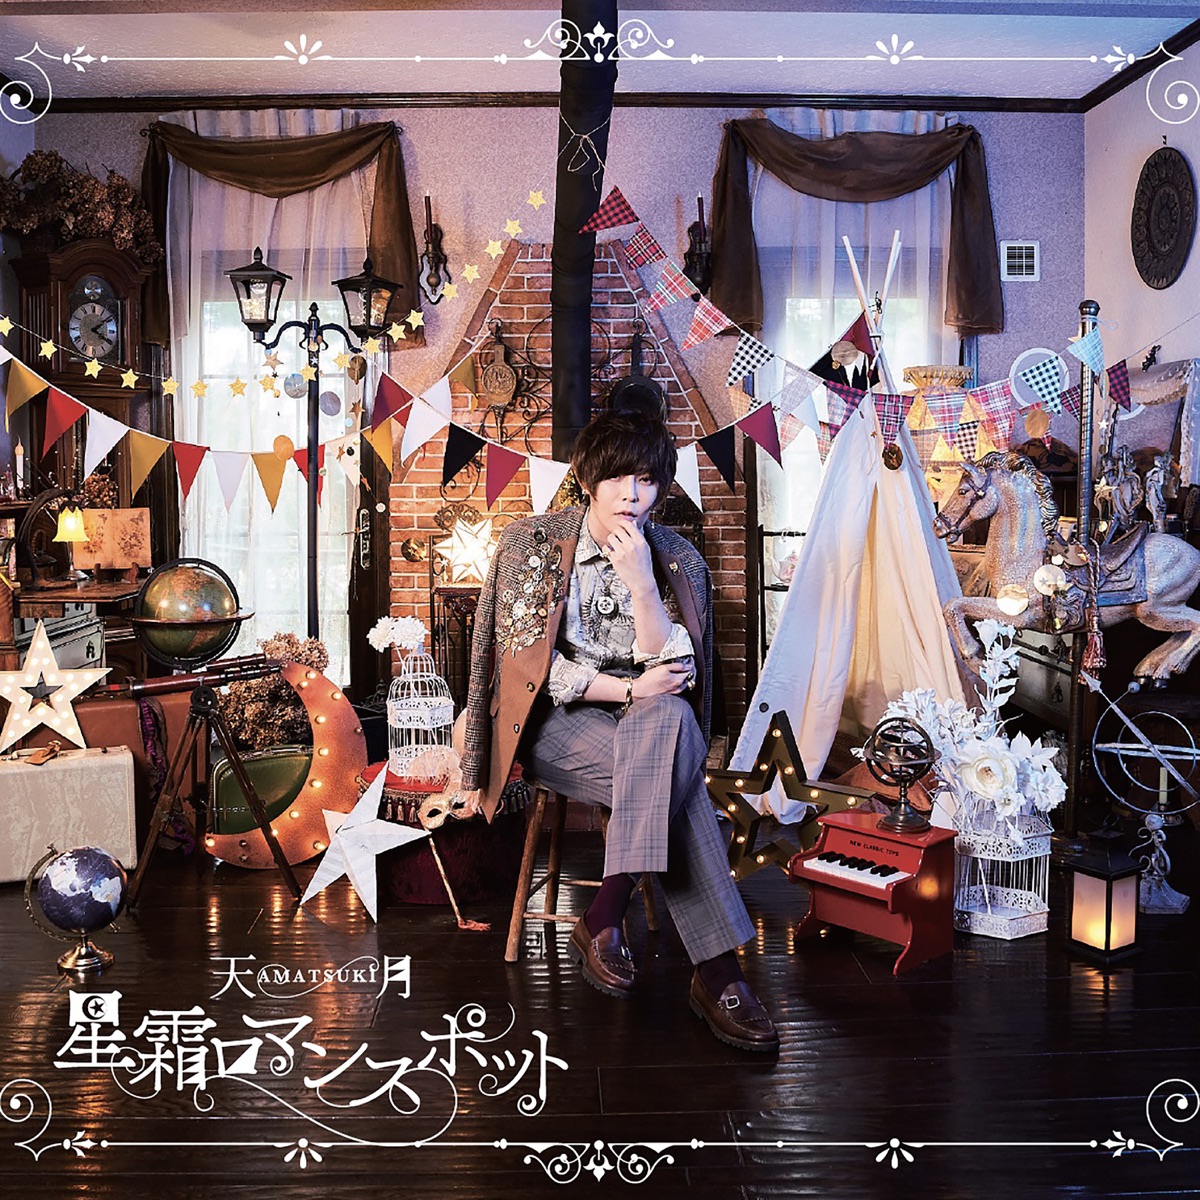 Cover art for『Amatsuki - ヘイトスピーチ feat. まふまふ』from the release『Seisou Roman Spot